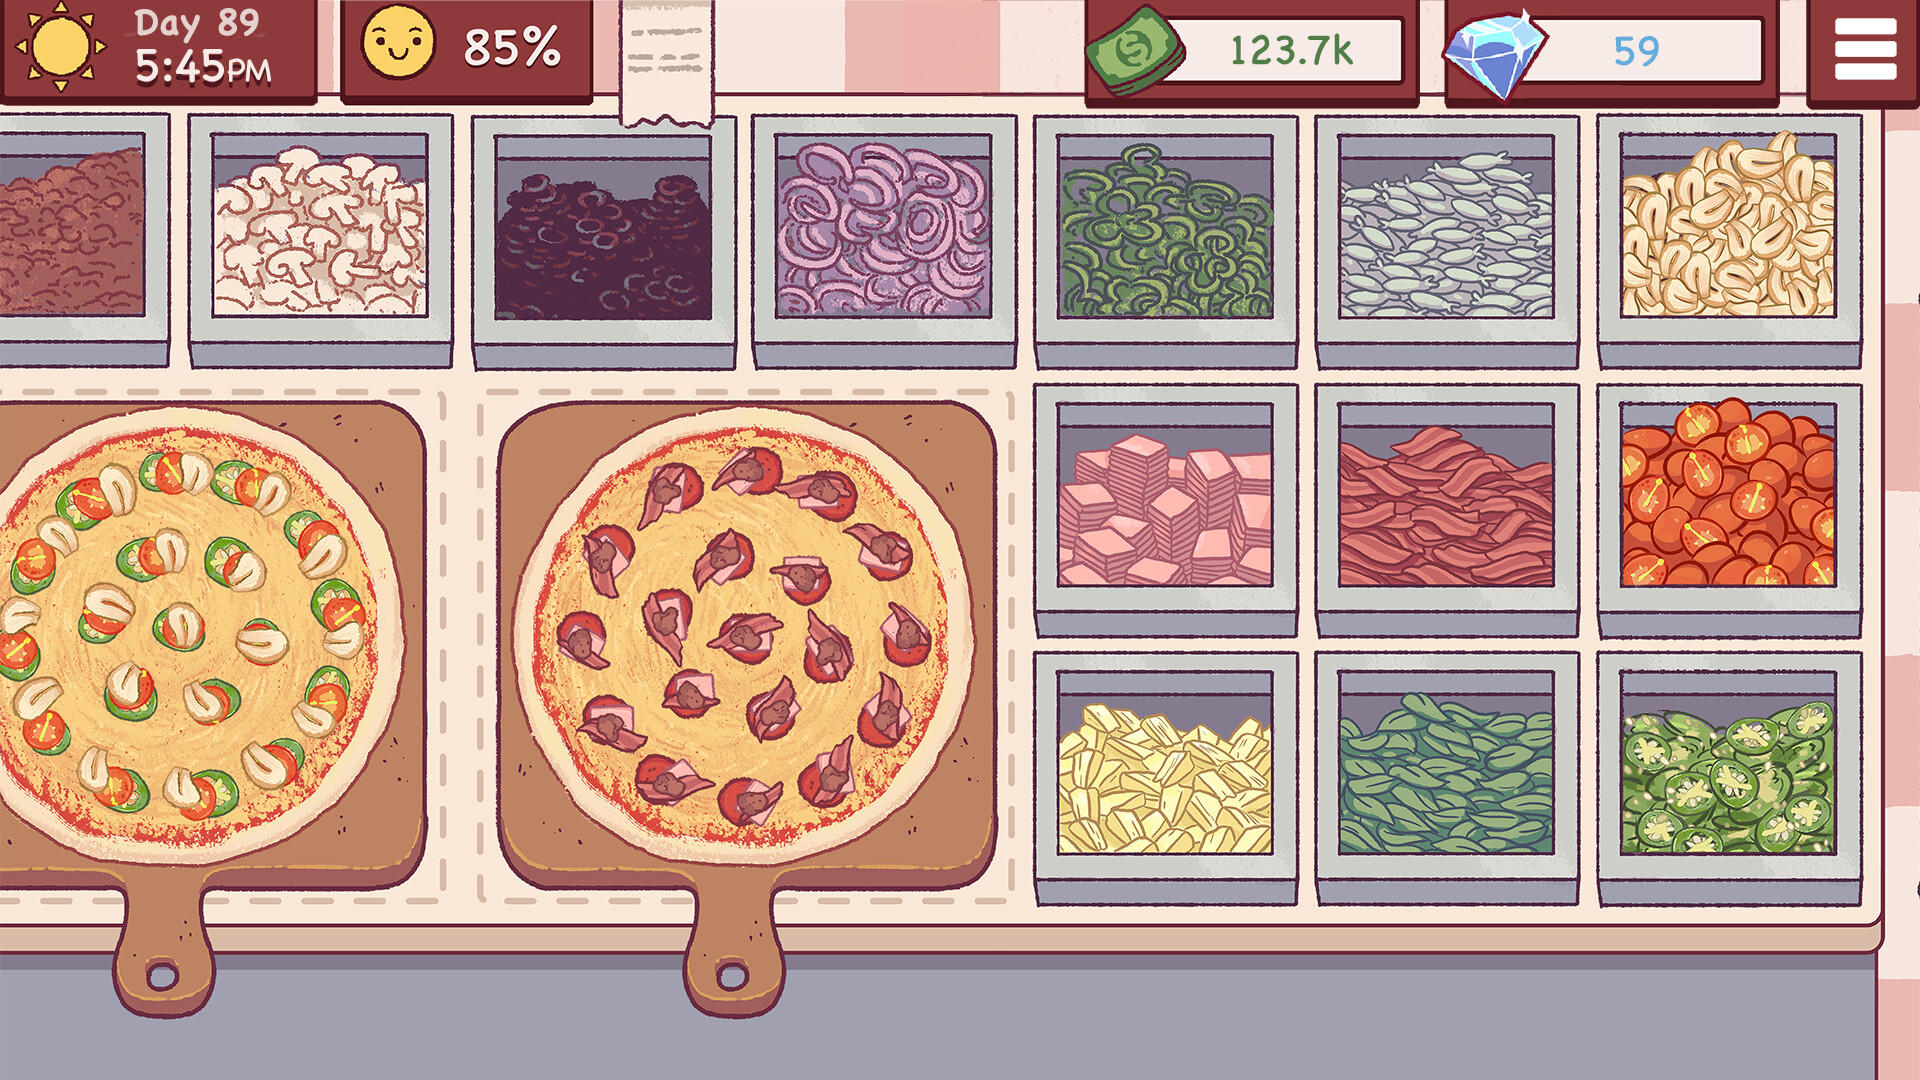 Good Pizza, Great Pizza - Cooking Simulator Game android iOS-TapTap